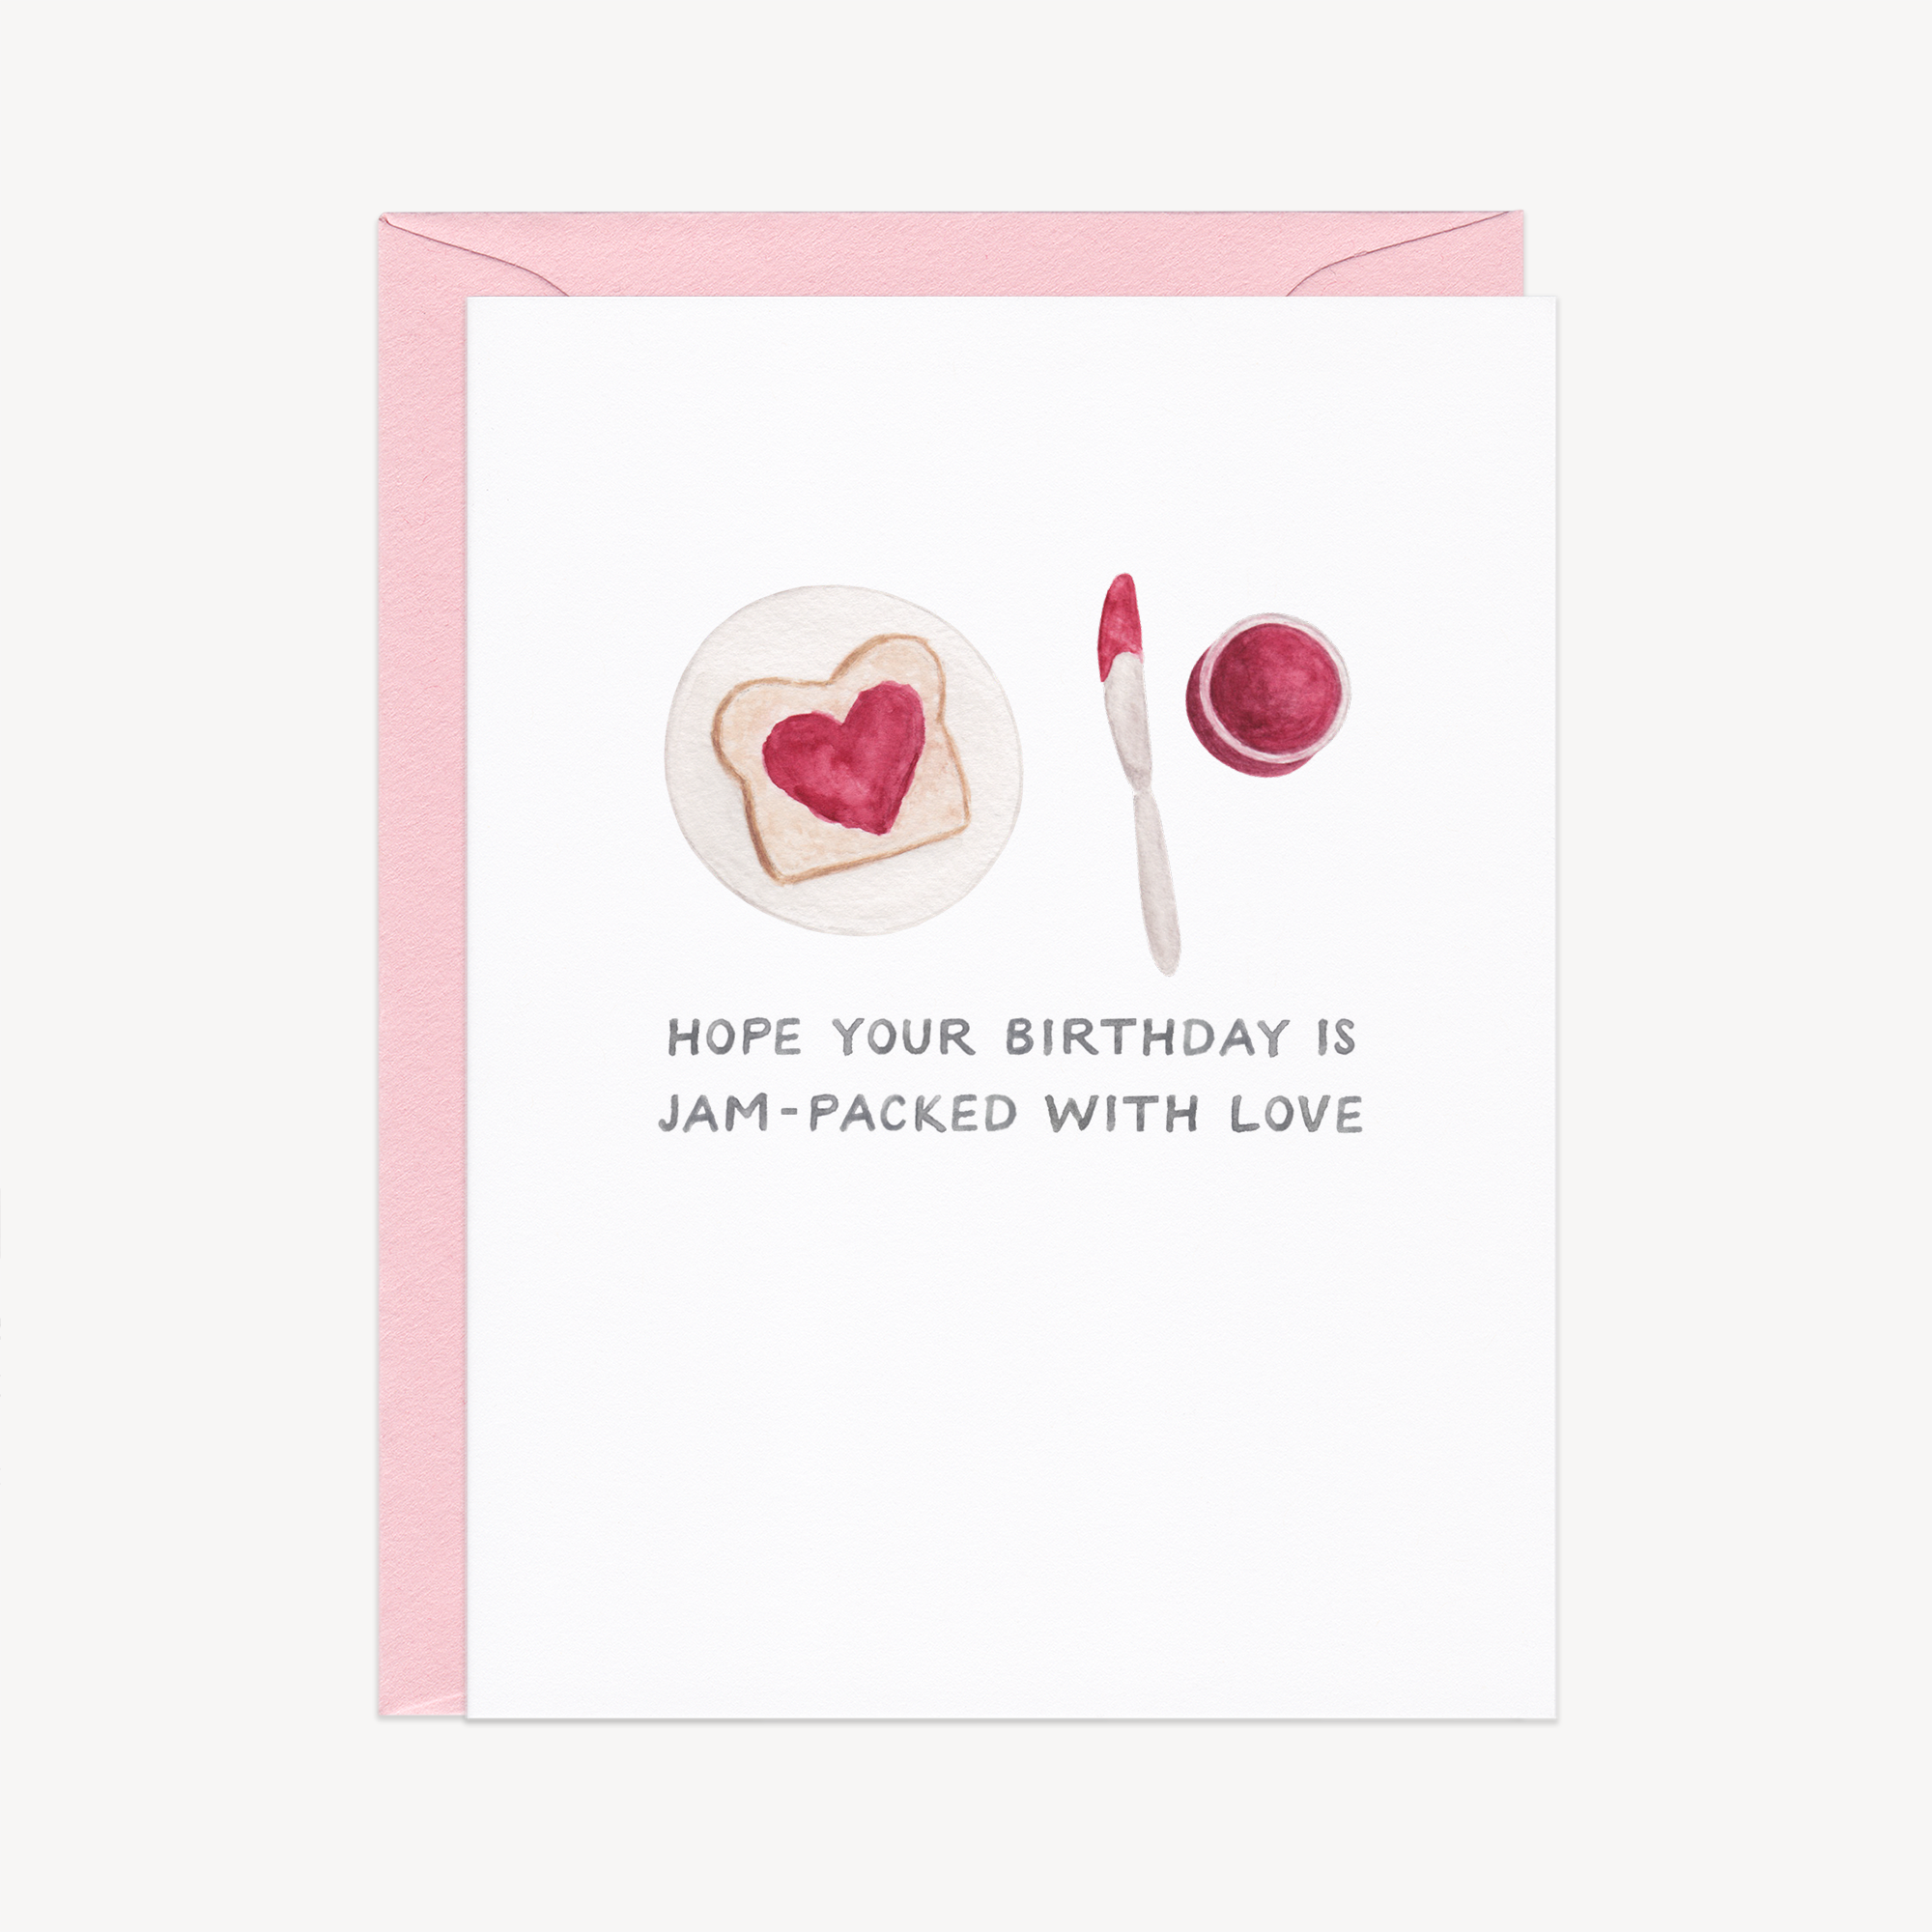 Jam-Packed With Love Birthday Card